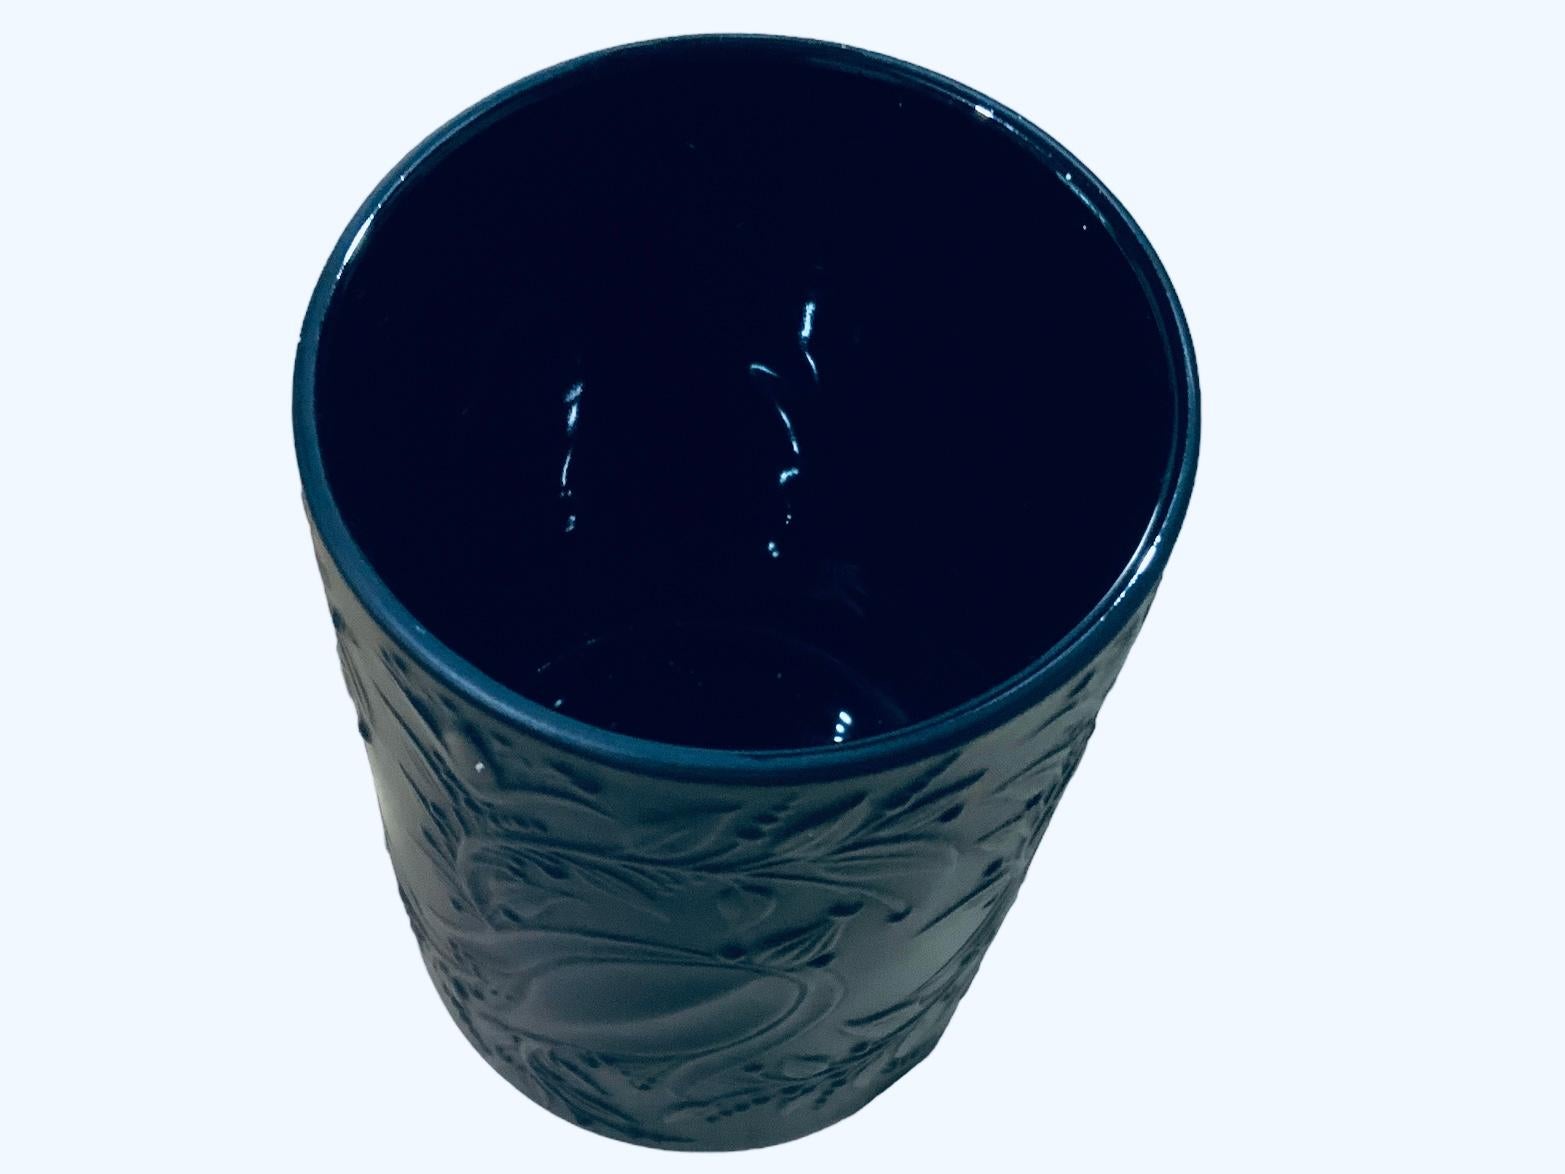 This is a Rosenthal Studio Bjorn Winblad Black Porcelain Small Vase. It depicts a small cylindrical vase embossed around with some flowers and leaves. Below the base is hallmarked Rosenthal Studio and signed by Bjorn Winblad.